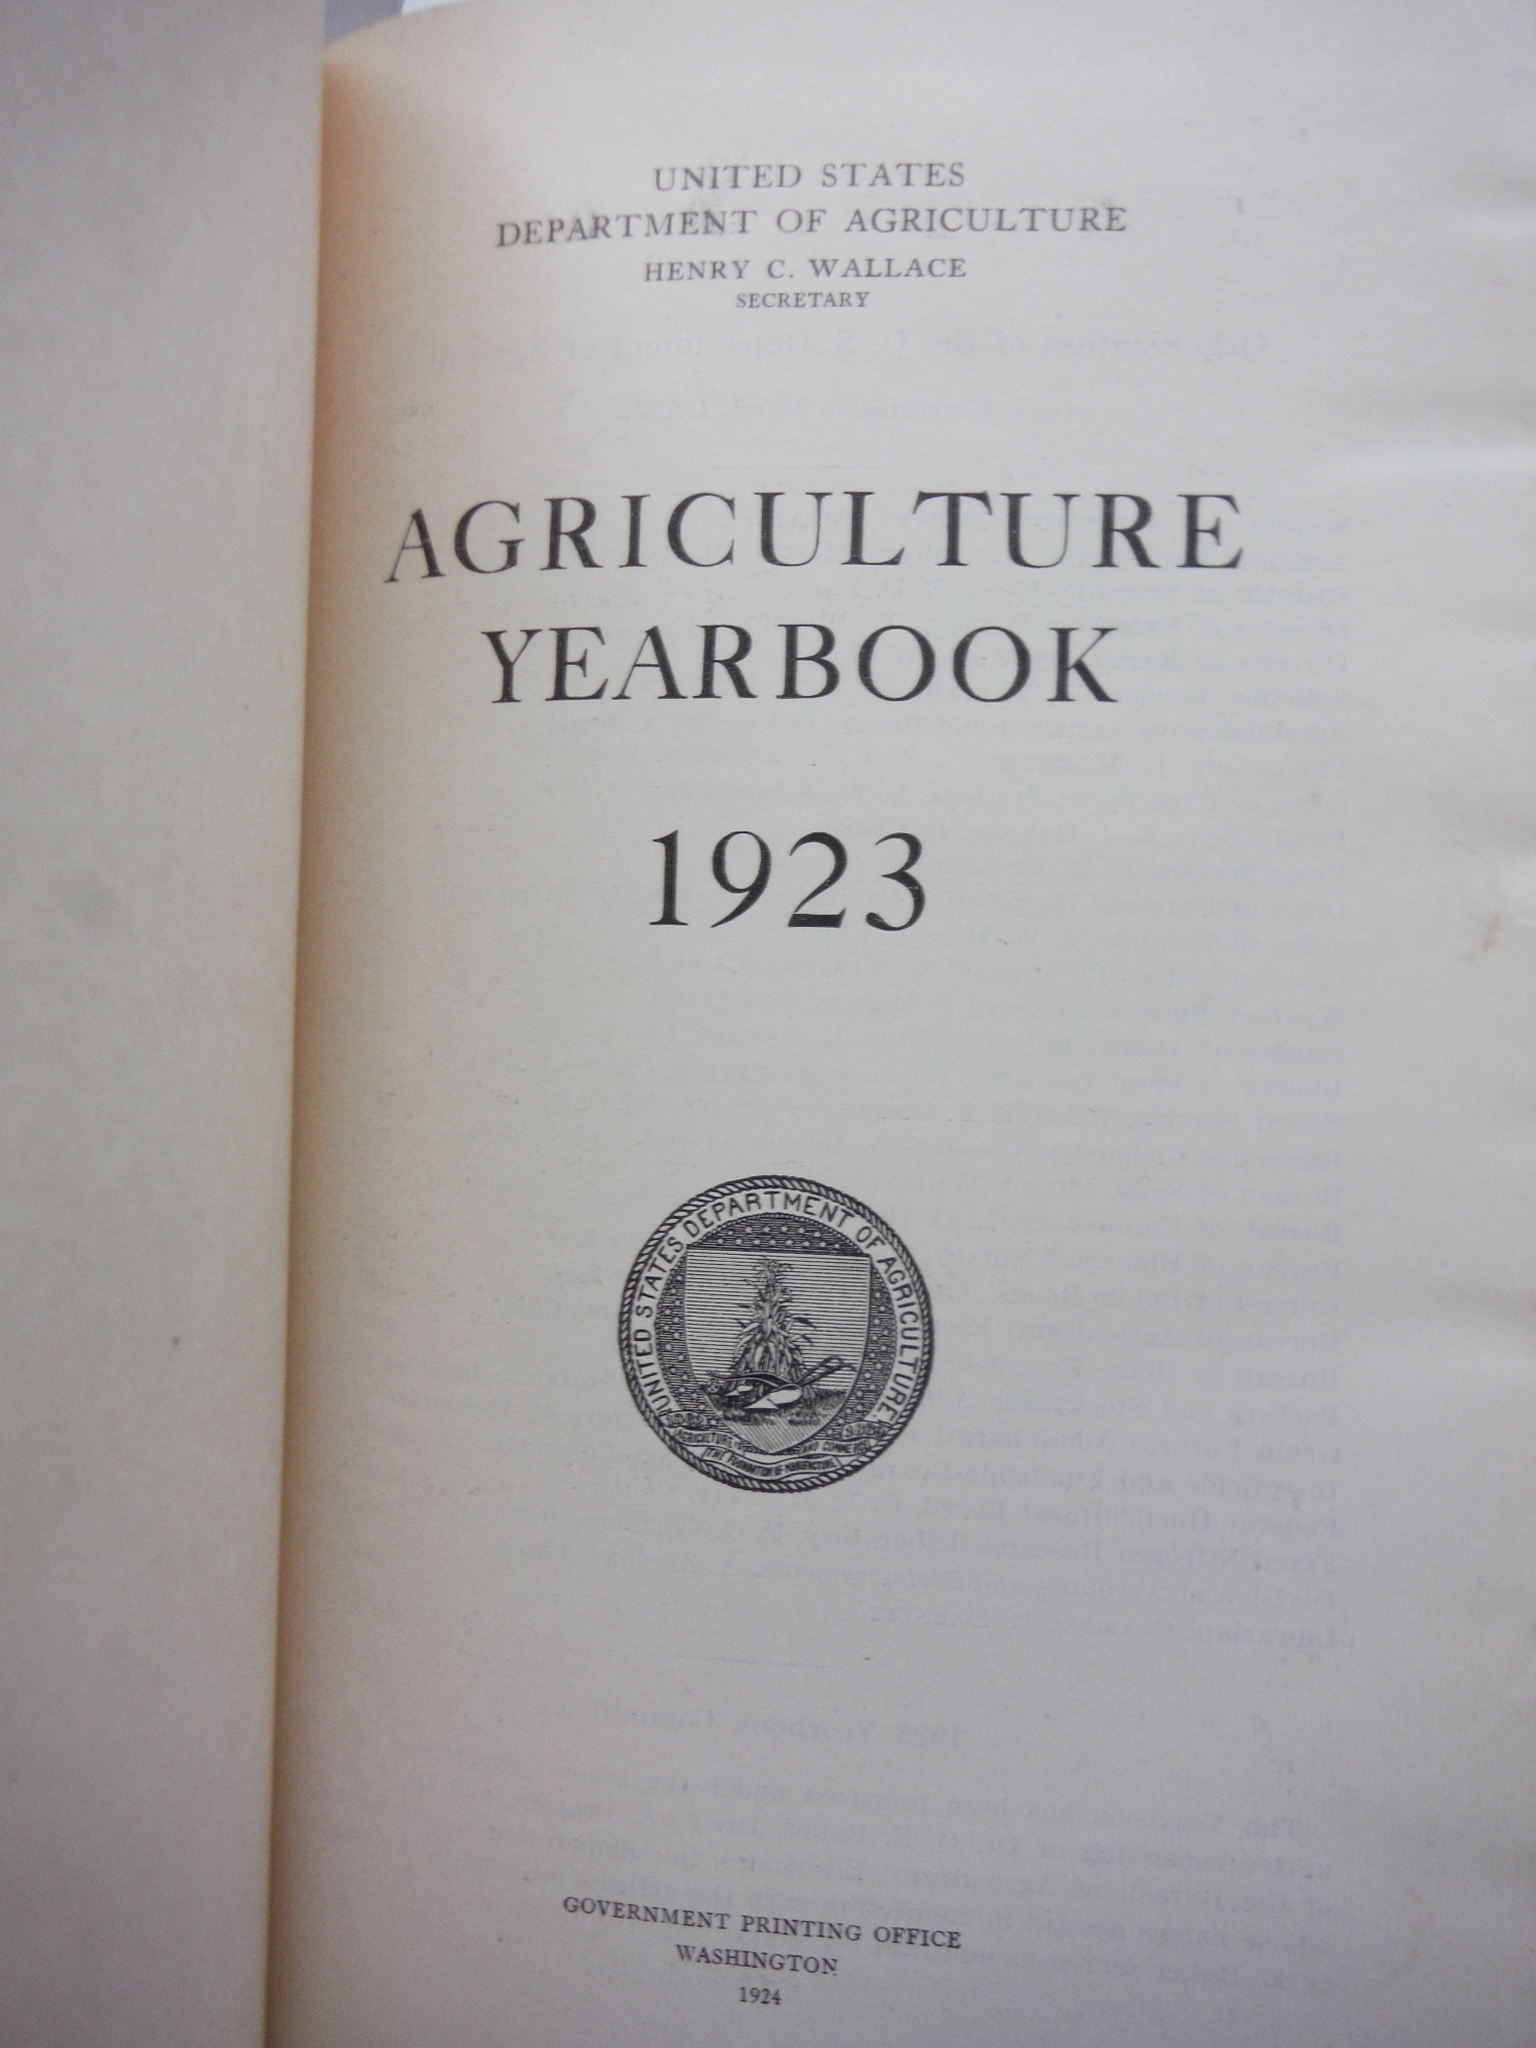 Image 1 of  Agriculture Yearbook 1923